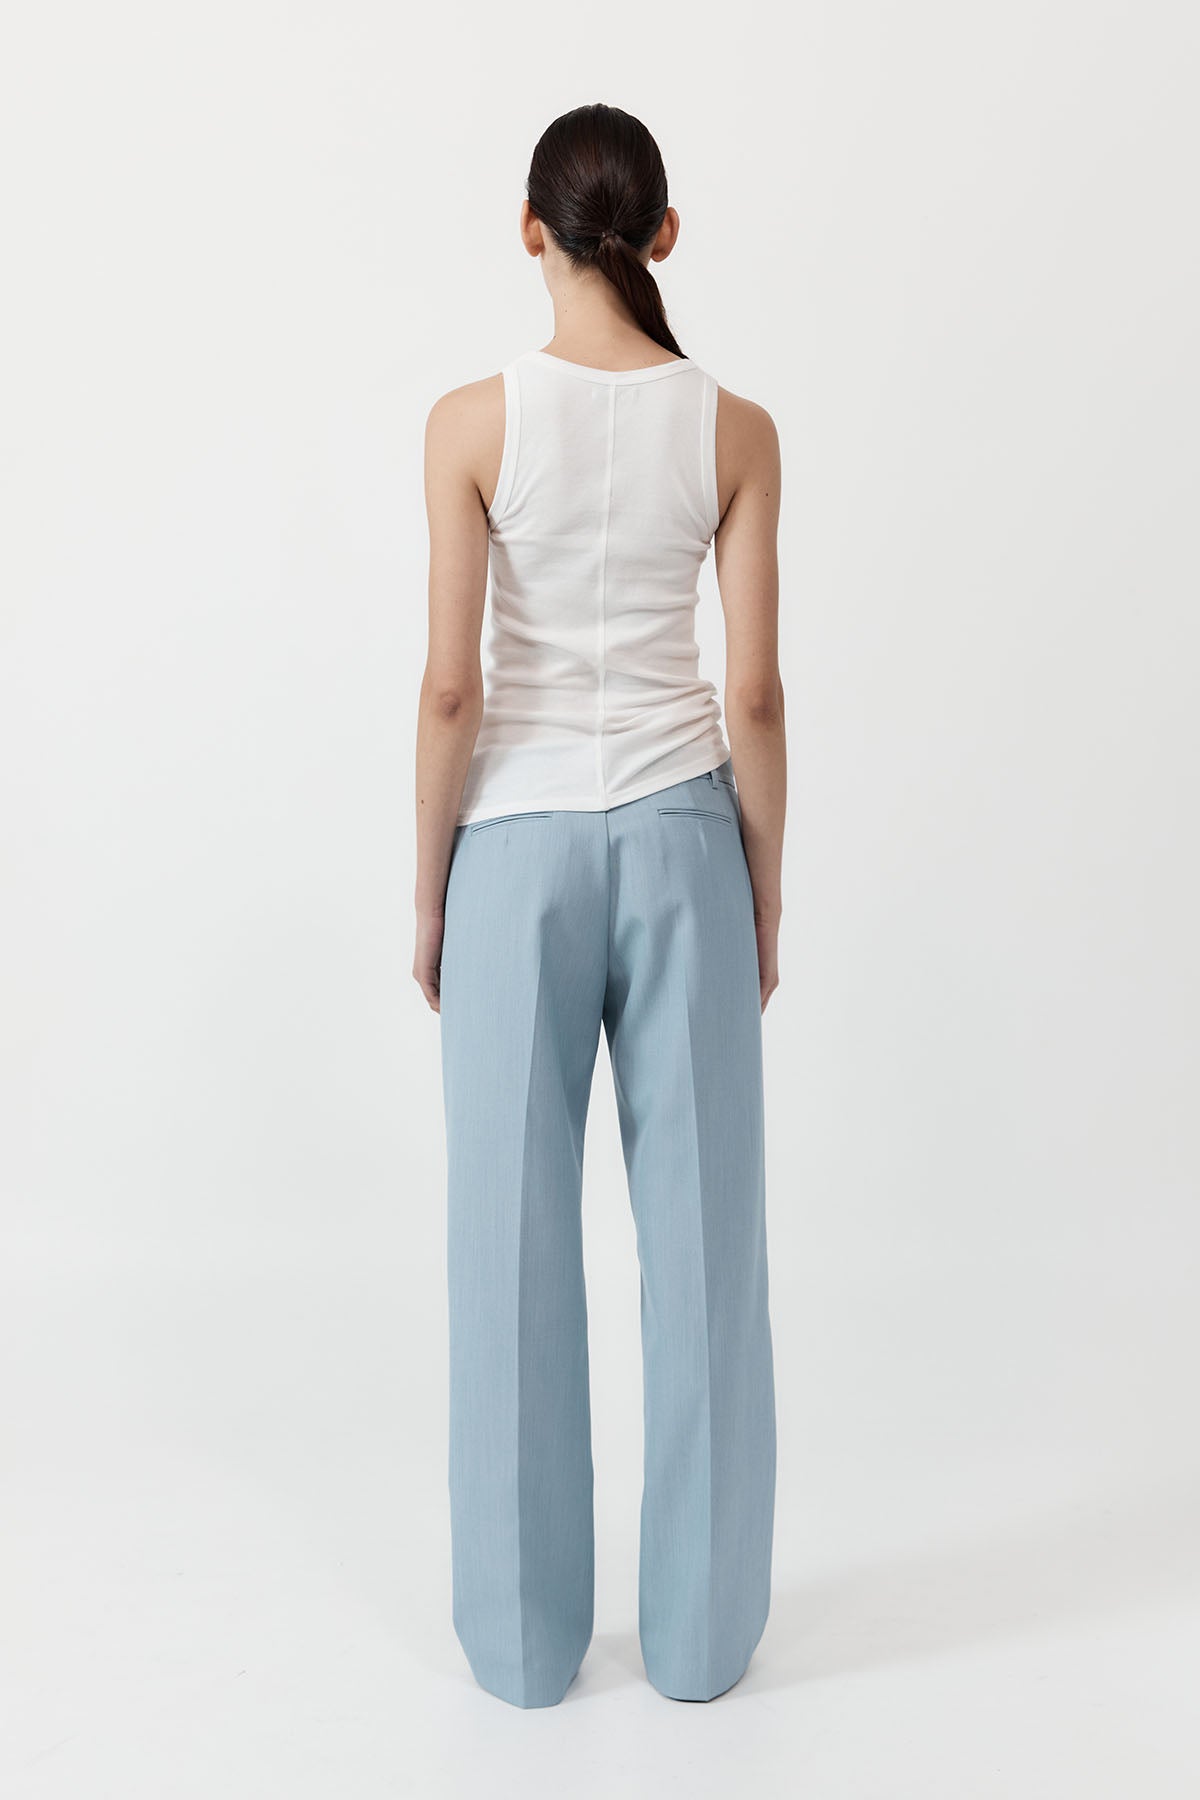 Carter Trousers - Stone Blue